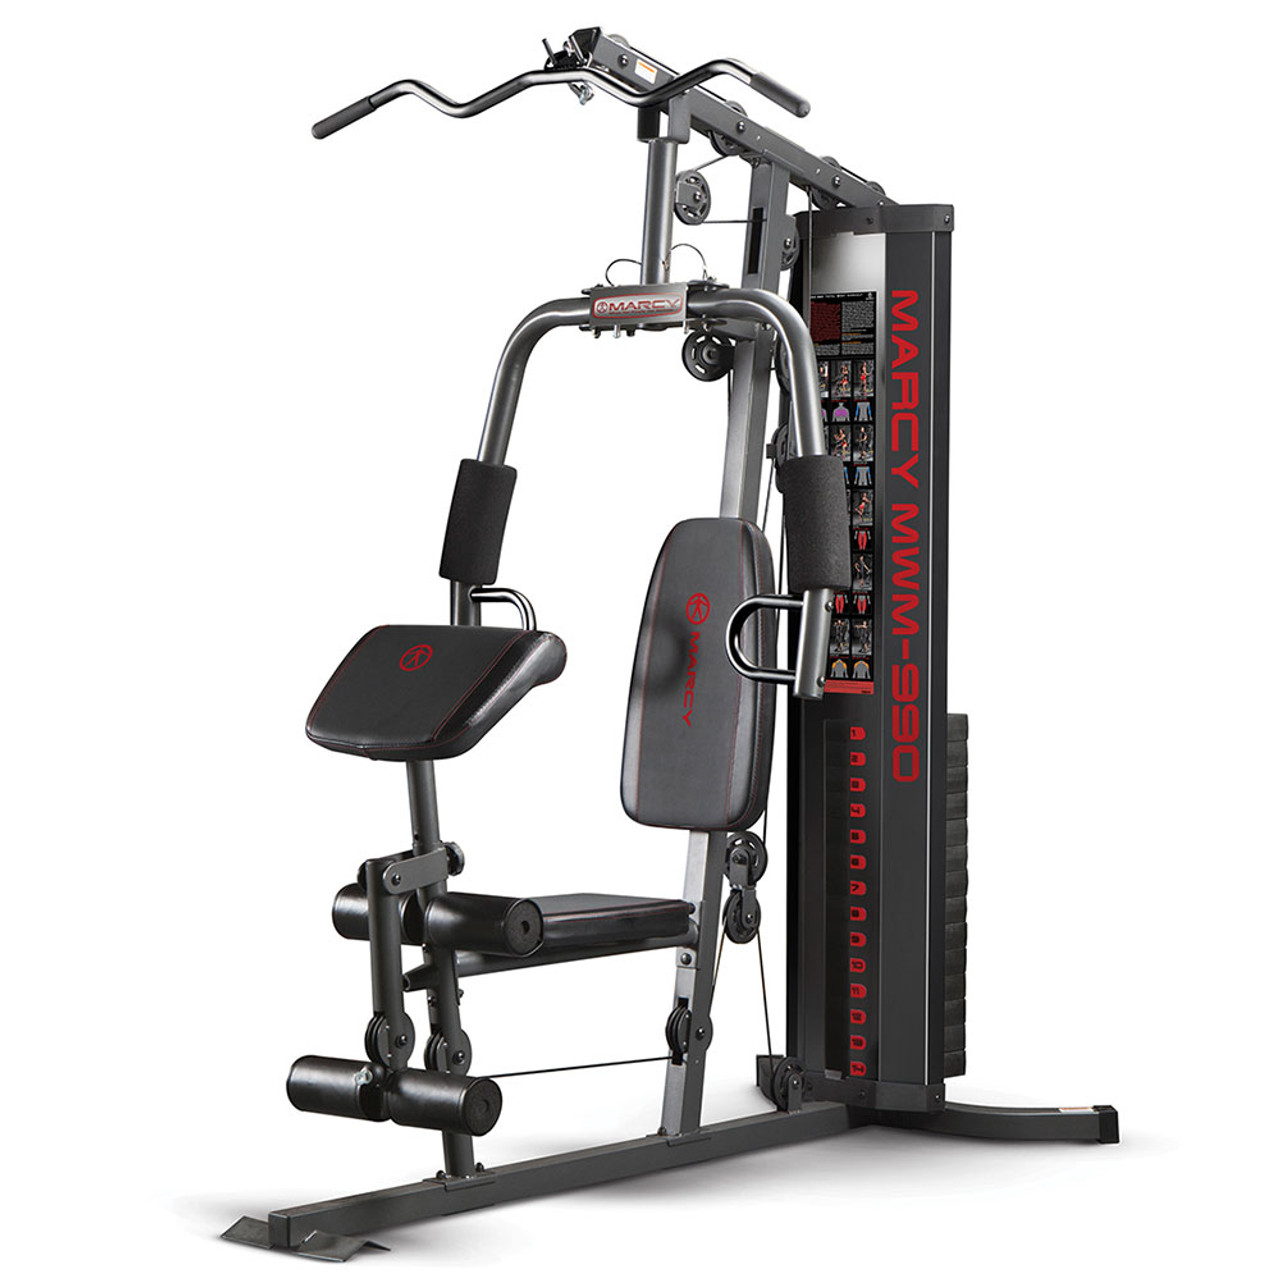 What Are the Best Piece of Home Fitness Equipment?